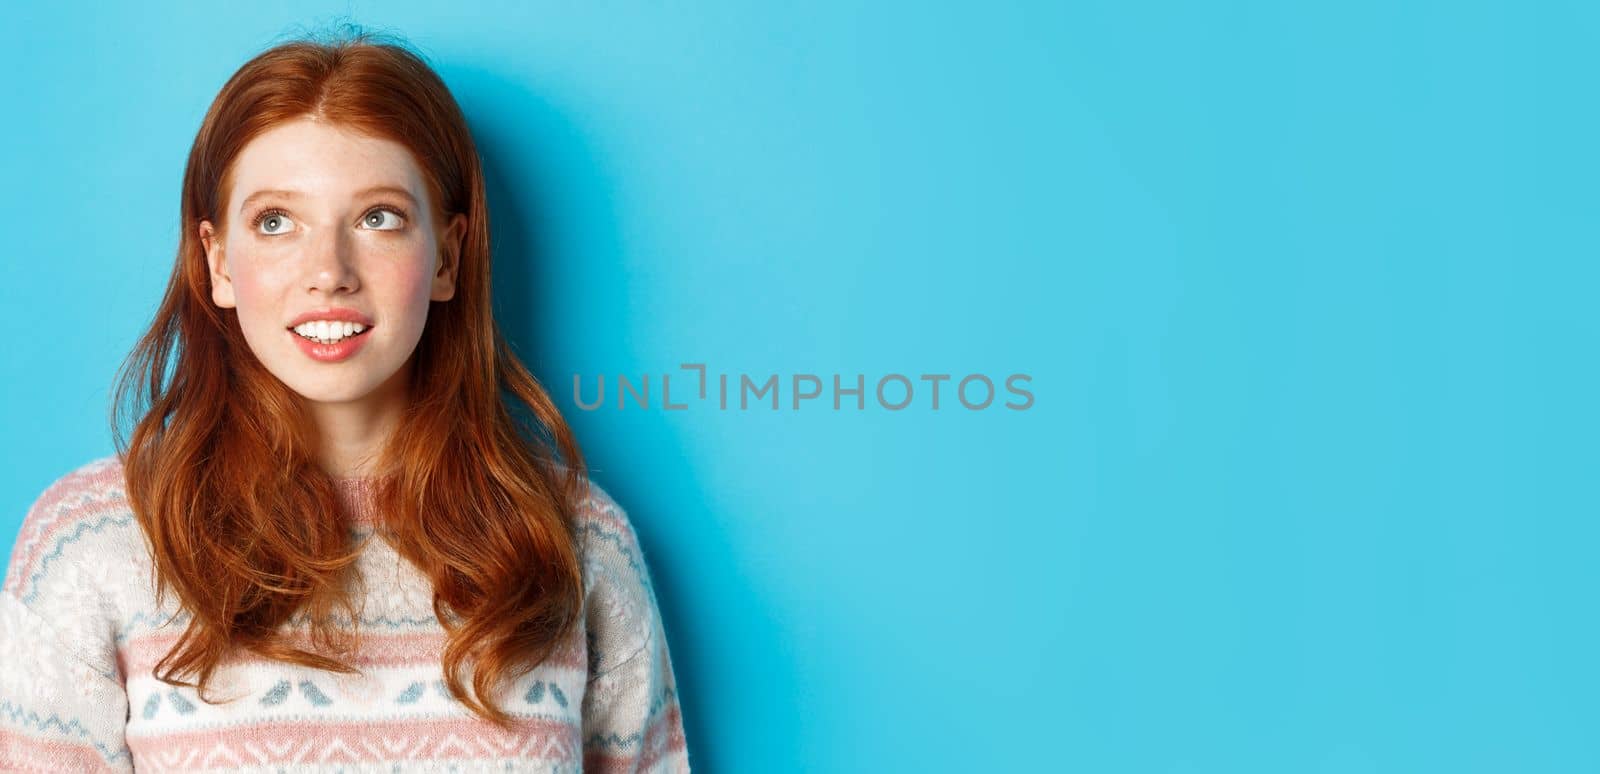 Close-up of dreamy teen girl with red hair, looking at upper left corner and smiling, standing against blue background.